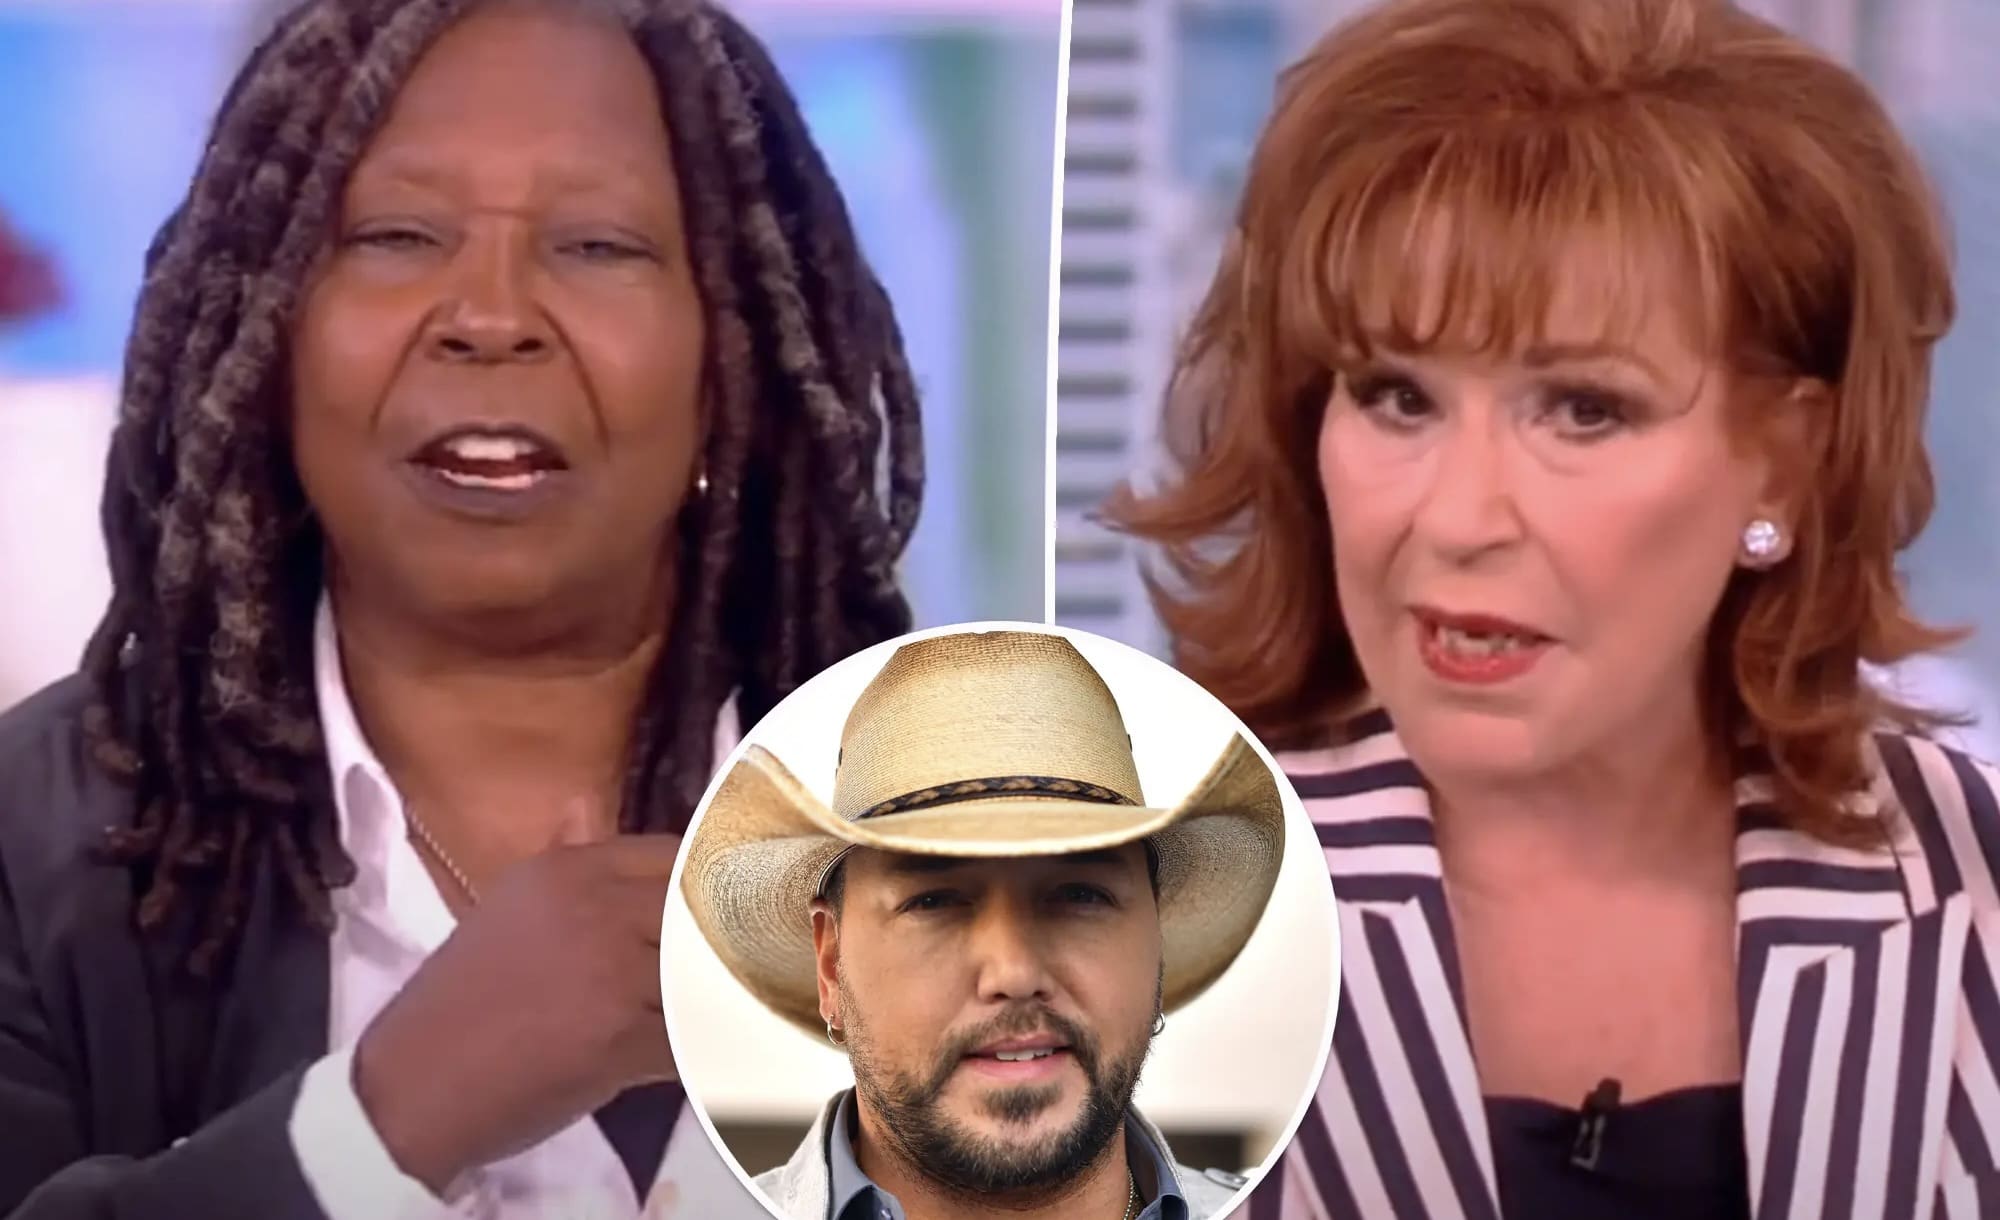 The Hosts Of ‘The View’ Tore Into Jason Aldean Over His Controversial ‘Try That In A Small Town’ Song And Video